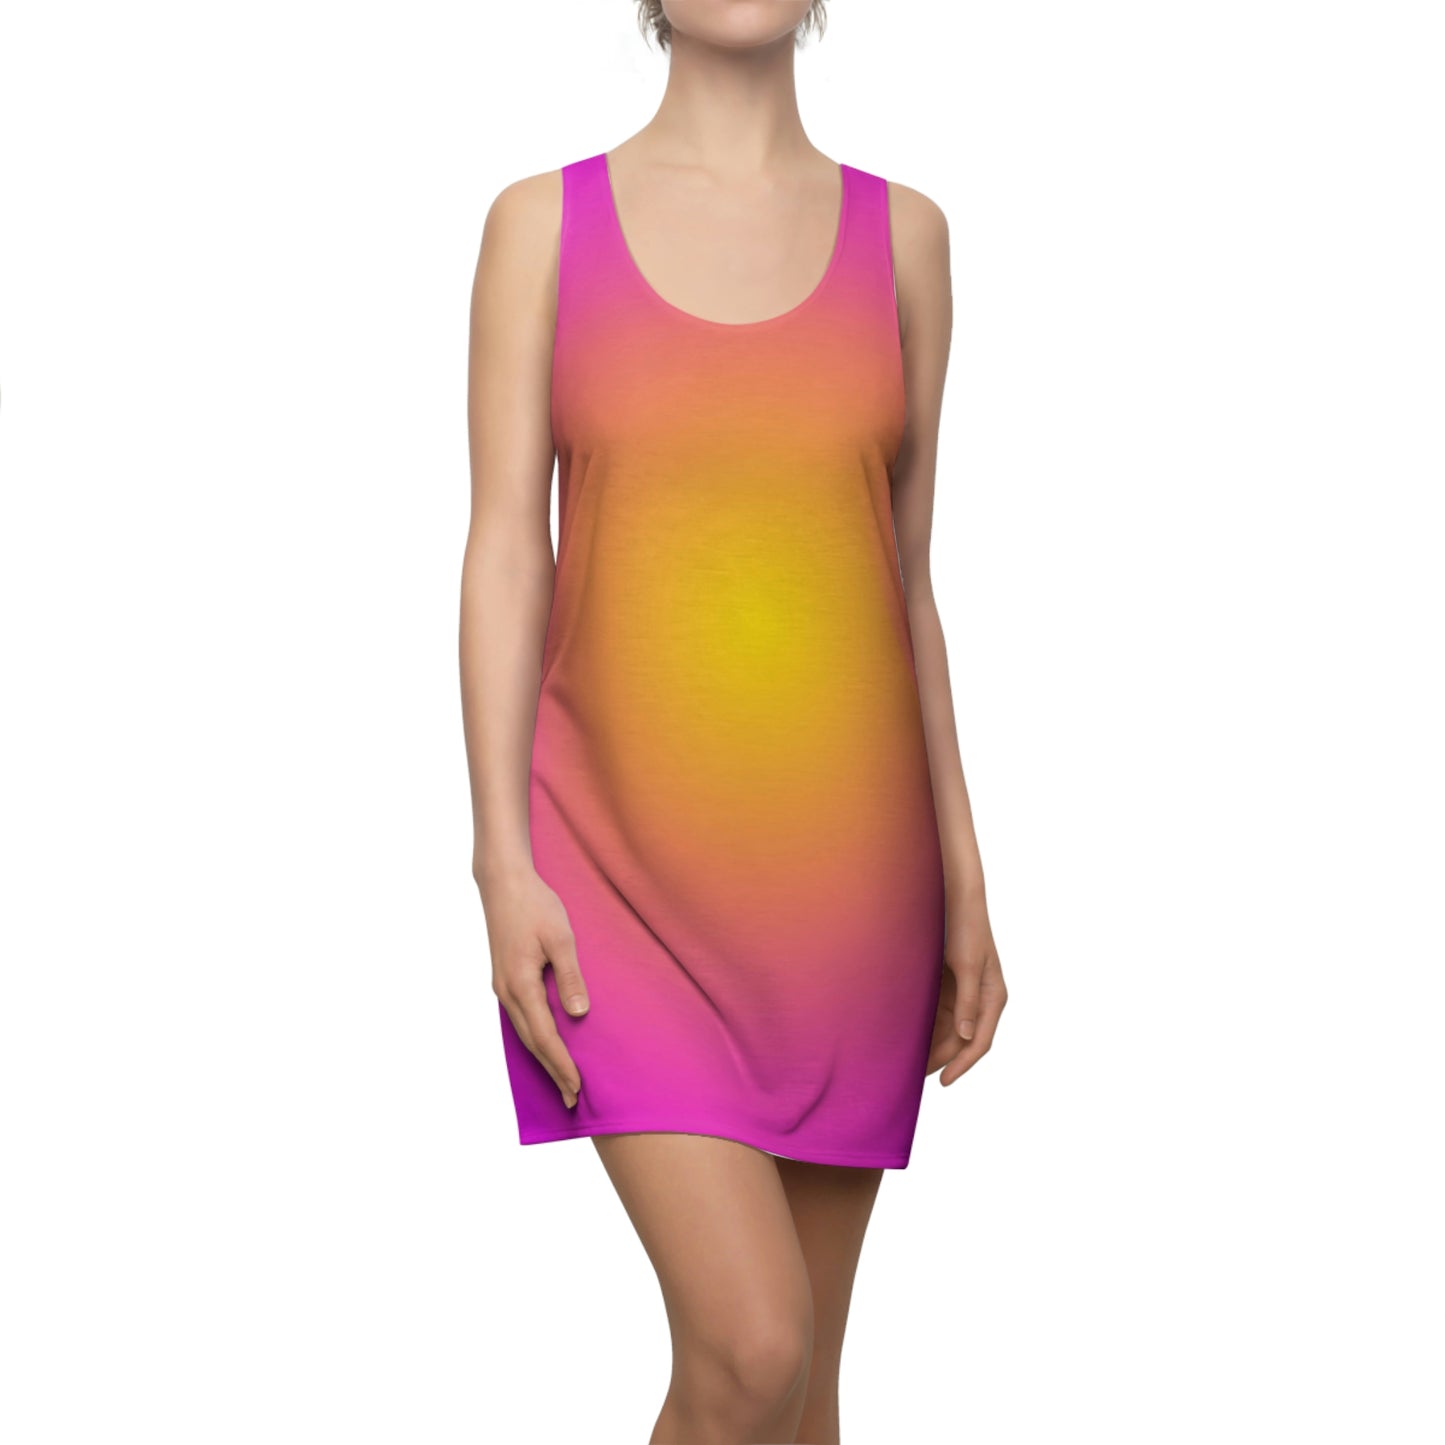 The Tropical Punch Racerback Dress